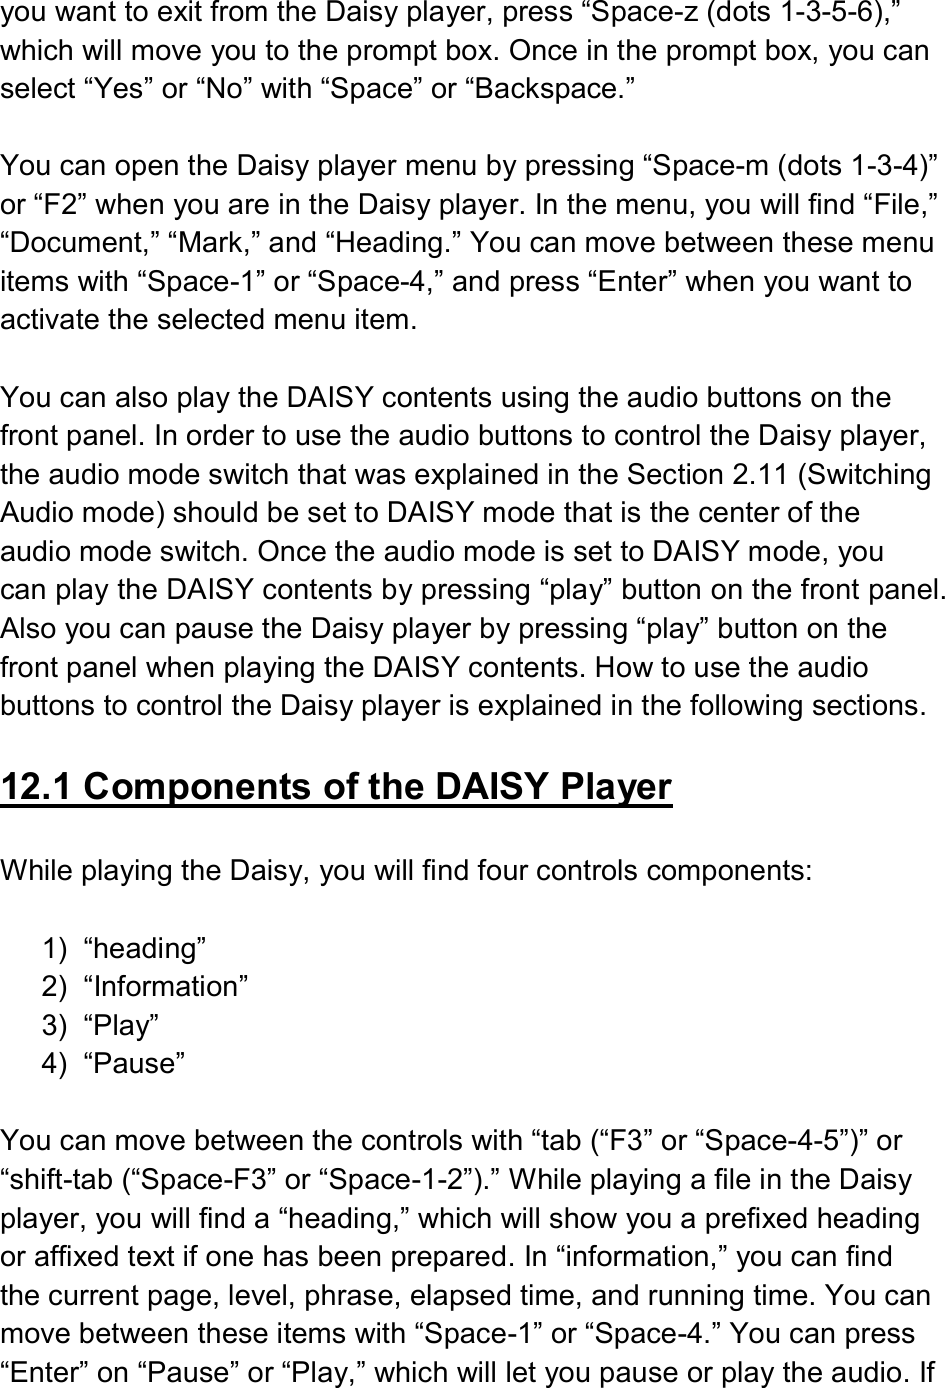  you want to exit from the Daisy player, press “Space-z (dots 1-3-5-6),” which will move you to the prompt box. Once in the prompt box, you can select “Yes” or “No” with “Space” or “Backspace.”  You can open the Daisy player menu by pressing “Space-m (dots 1-3-4)” or “F2” when you are in the Daisy player. In the menu, you will find “File,” “Document,” “Mark,” and “Heading.” You can move between these menu items with “Space-1” or “Space-4,” and press “Enter” when you want to activate the selected menu item.  You can also play the DAISY contents using the audio buttons on the front panel. In order to use the audio buttons to control the Daisy player, the audio mode switch that was explained in the Section 2.11 (Switching Audio mode) should be set to DAISY mode that is the center of the audio mode switch. Once the audio mode is set to DAISY mode, you can play the DAISY contents by pressing “play” button on the front panel. Also you can pause the Daisy player by pressing “play” button on the front panel when playing the DAISY contents. How to use the audio buttons to control the Daisy player is explained in the following sections.  12.1 Components of the DAISY Player  While playing the Daisy, you will find four controls components:    1)  “heading”   2)  “Information”   3)  “Play” 4)  “Pause”    You can move between the controls with “tab (“F3” or “Space-4-5”)” or “shift-tab (“Space-F3” or “Space-1-2”).” While playing a file in the Daisy player, you will find a “heading,” which will show you a prefixed heading or affixed text if one has been prepared. In “information,” you can find the current page, level, phrase, elapsed time, and running time. You can move between these items with “Space-1” or “Space-4.” You can press “Enter” on “Pause” or “Play,” which will let you pause or play the audio. If 